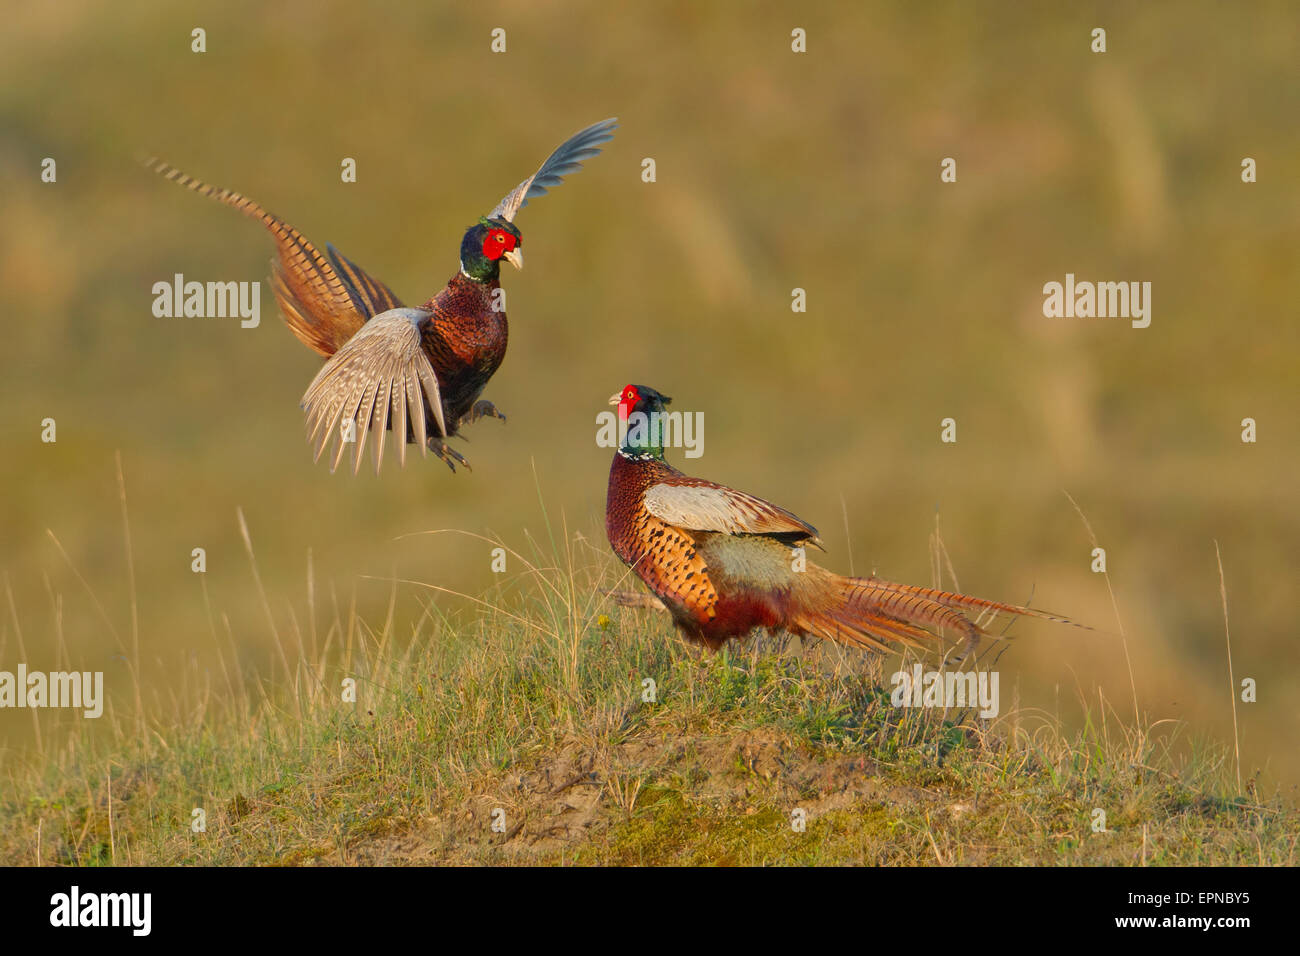 Fighting male pheasants (Phasianus colchicus), Texel, The Netherlands Stock Photo